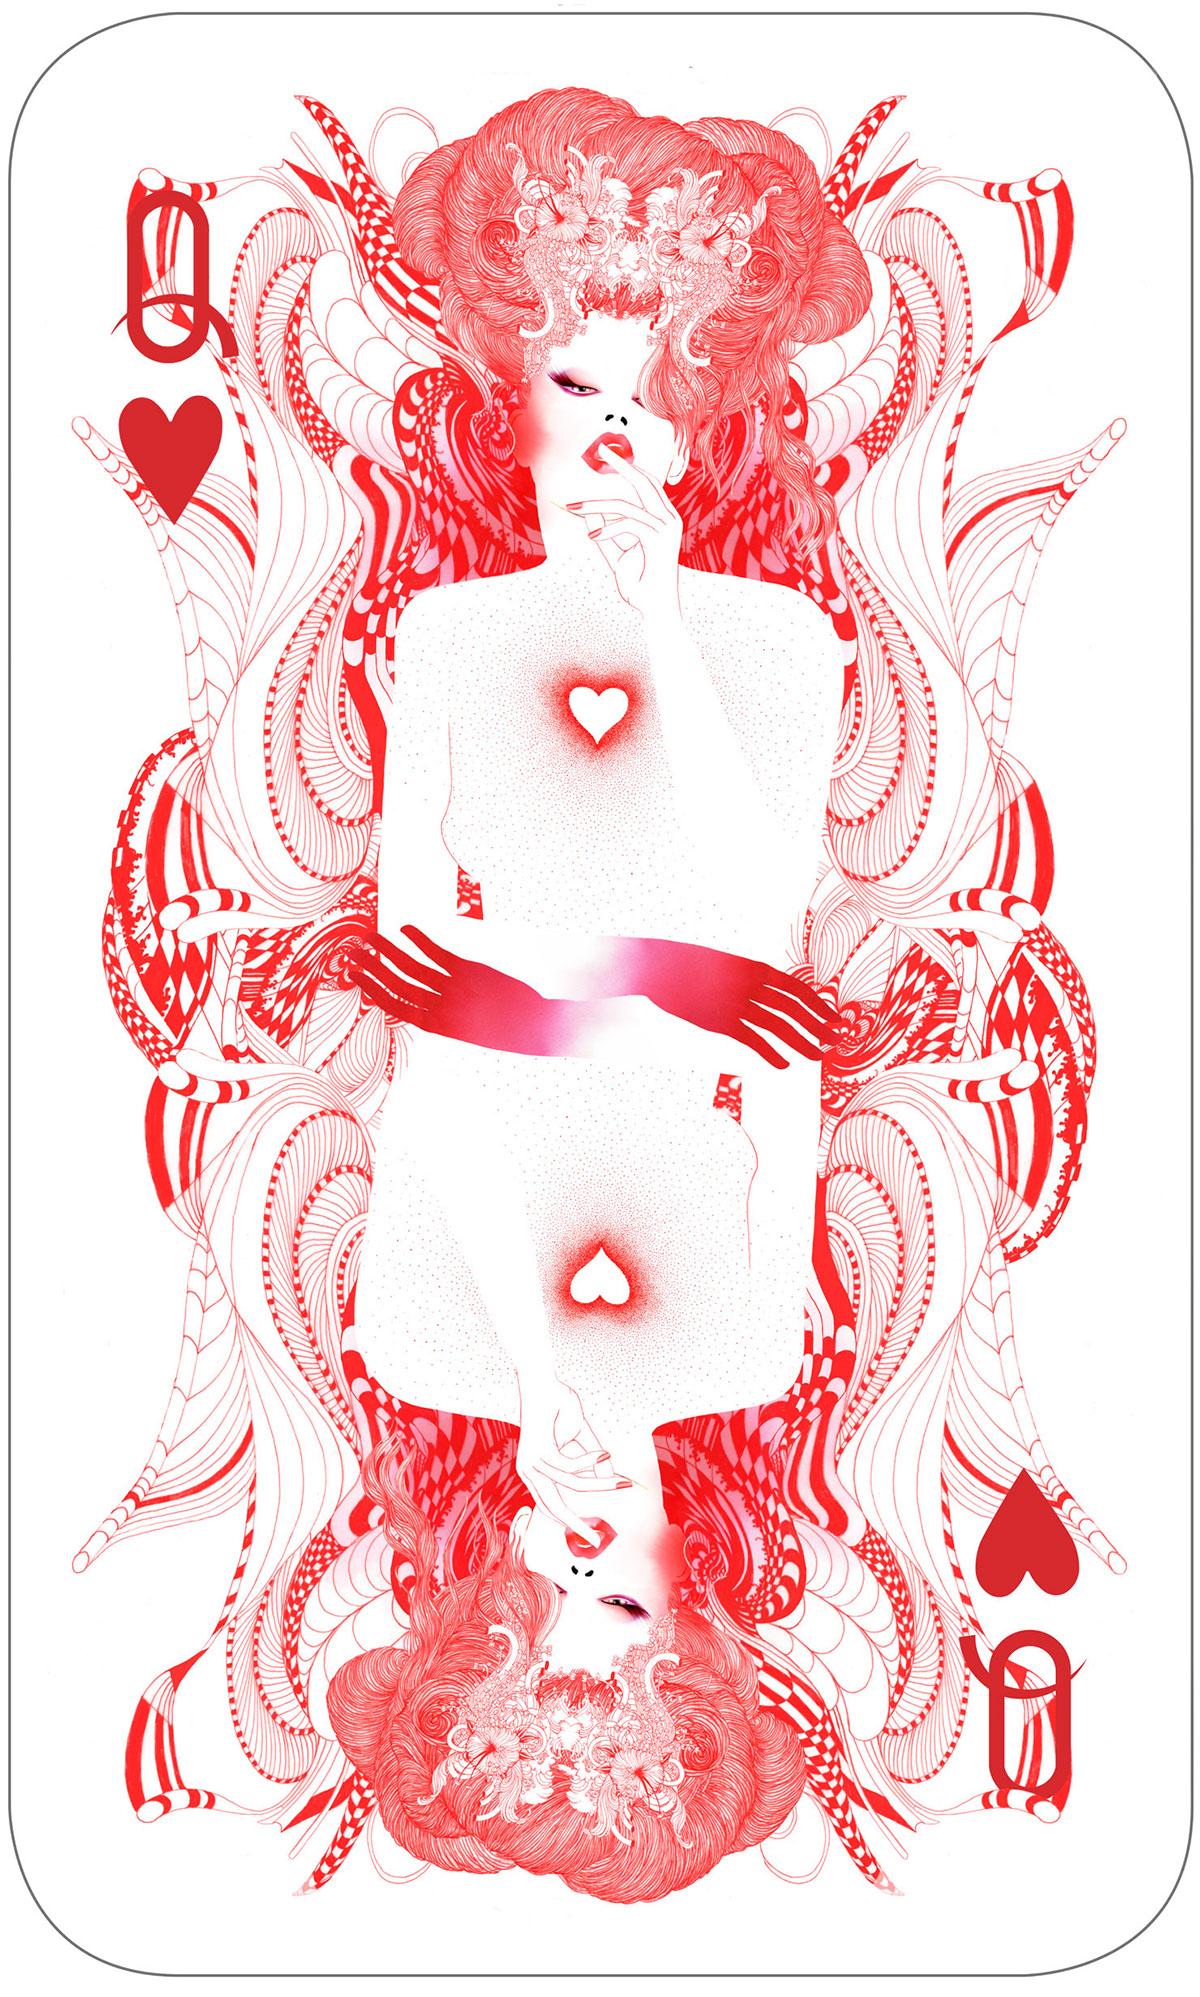 queen of hearts by Noumeda Carbone The Queen of spades Playing Cards illustration installation streeet art international artist amsterdam light festival 2015 oge group renowed illustrator Graphic Artist italian art